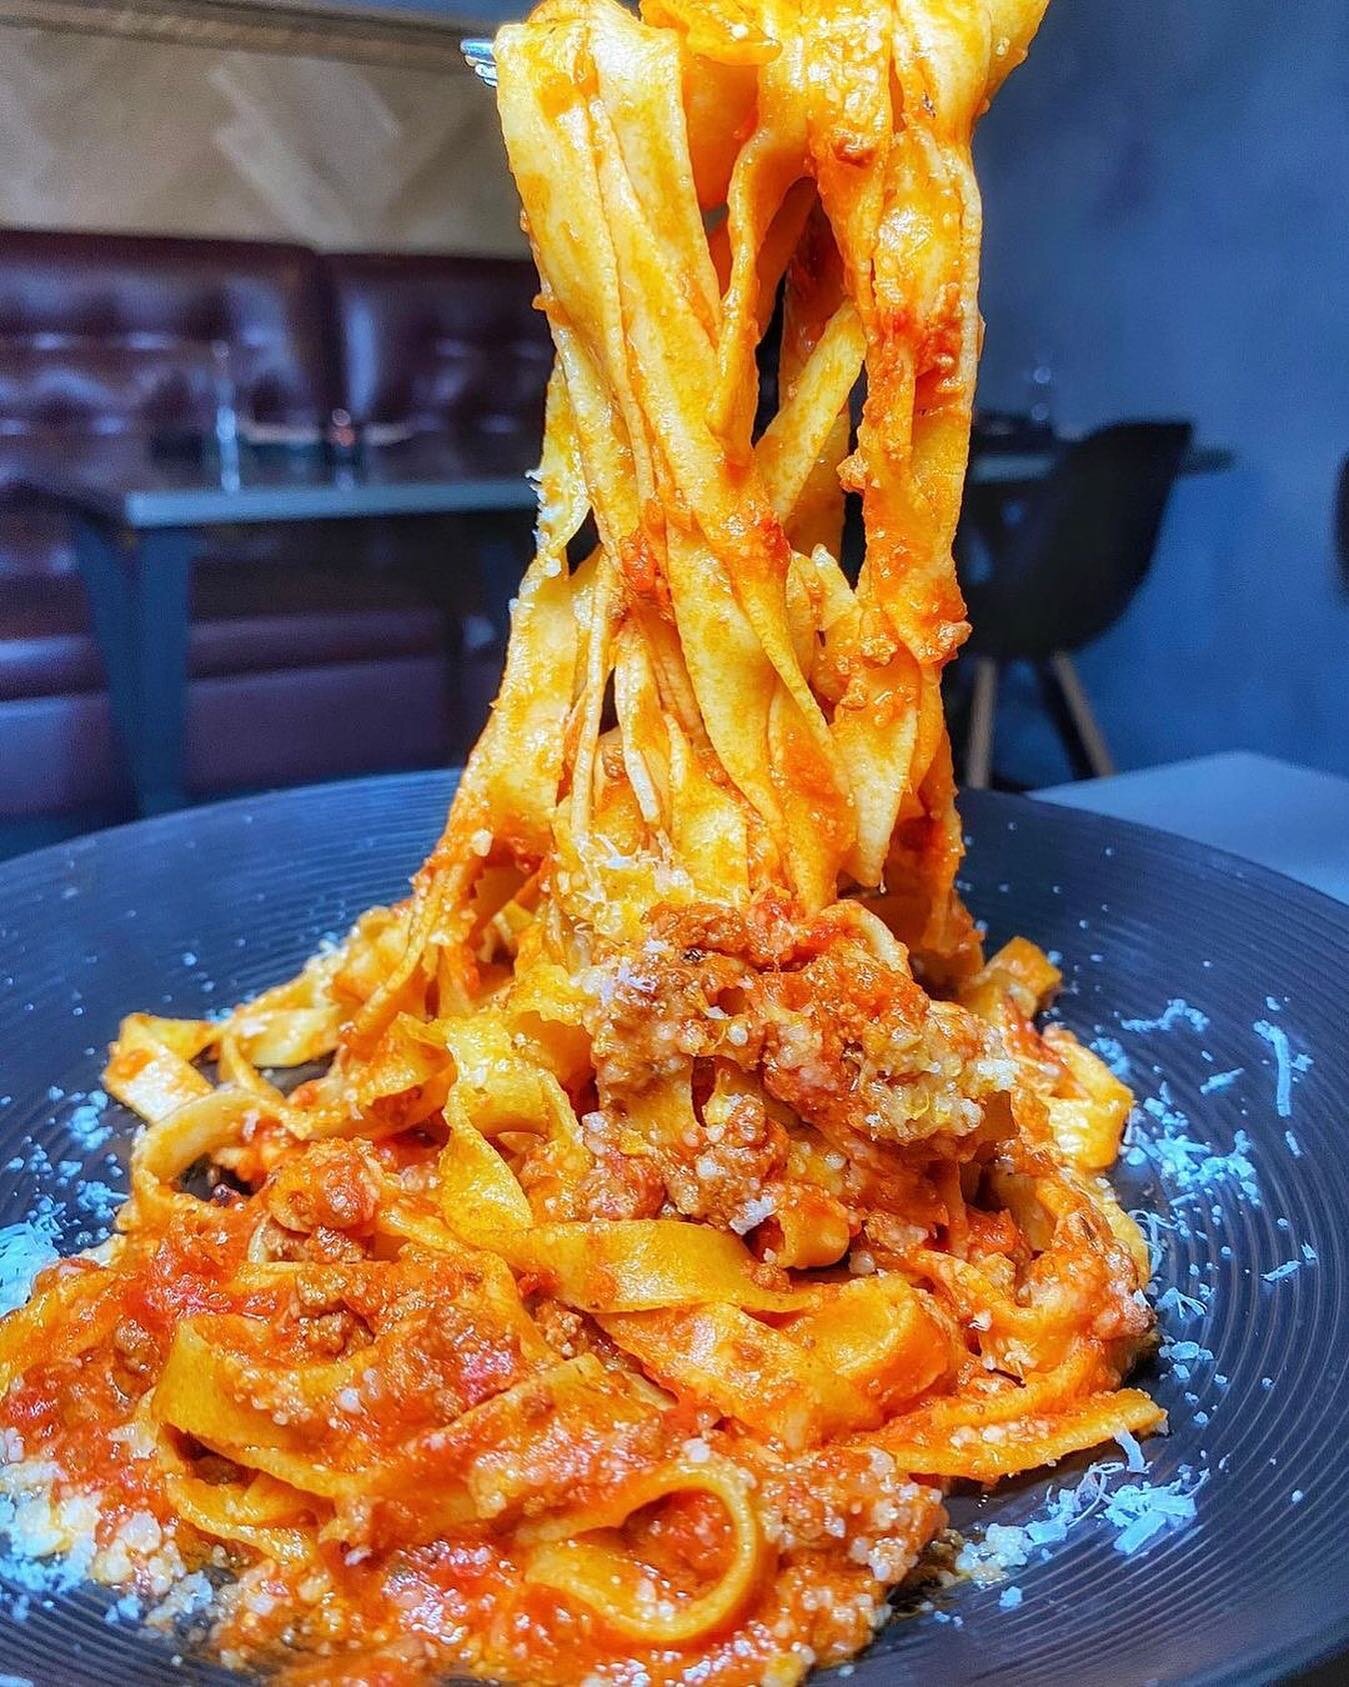 Get your LIFT on w/ our TAGLIATELLE BOLOGNESE! 🍝
📸: @ny_hidden_gems
The #1653PIZZACOMPANY is now OPEN‼️
#Huntington #LongIsland